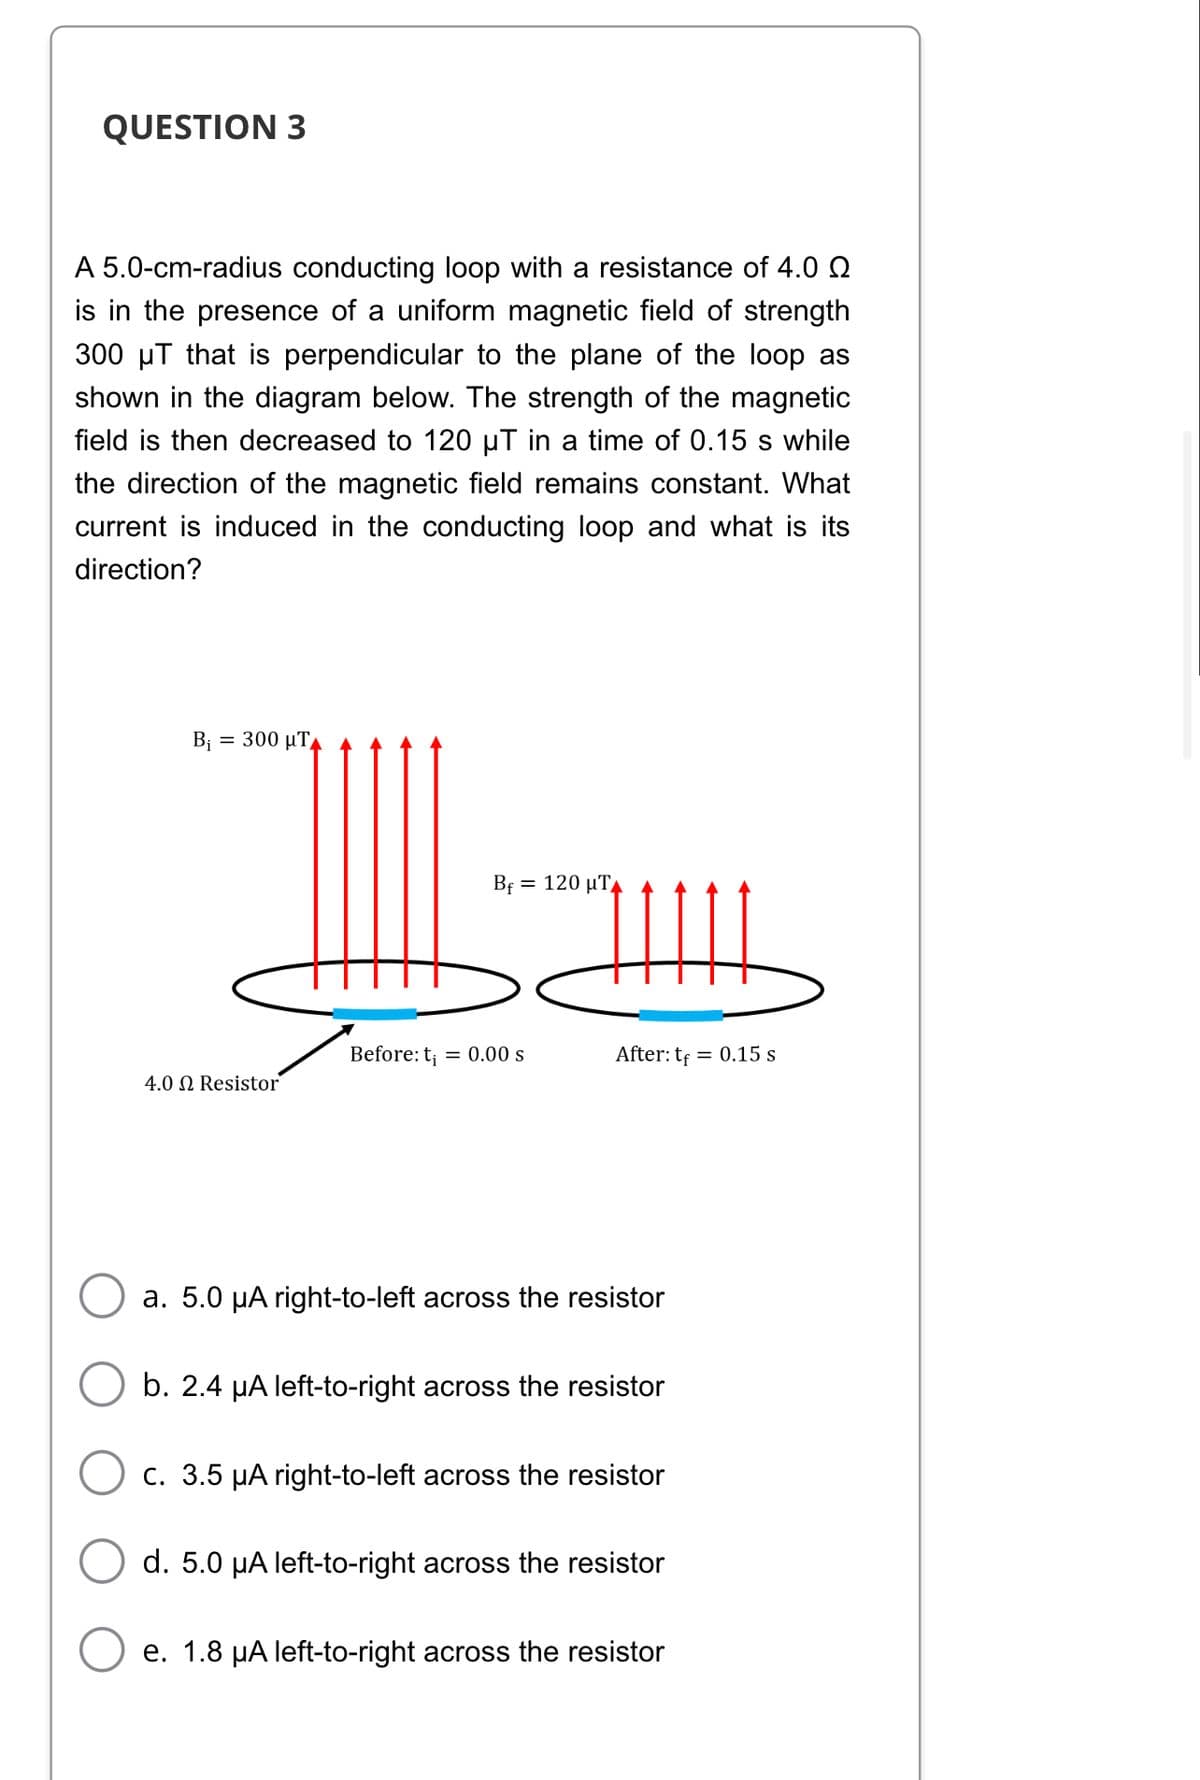 QUESTION 3
A 5.0-cm-radius conducting loop with a resistance of 4.0
is in the presence of a uniform magnetic field of strength
300 µT that is perpendicular to the plane of the loop as
shown in the diagram below. The strength of the magnetic
field is then decreased to 120 µT in a time of 0.15 s while
the direction of the magnetic field remains constant. What
current is induced in the conducting loop and what is its
direction?
B₁ = 300 μ.
Bf = 120 μ.,
After: tf = 0.15 s
Before: t₁ = 0.00 s
4.0 Resistor
a. 5.0 μA right-to-left across the resistor
b. 2.4 µA left-to-right across the resistor
c. 3.5 µA right-to-left across the resistor
d. 5.0 µA left-to-right across the resistor
e. 1.8 µA left-to-right across the resistor